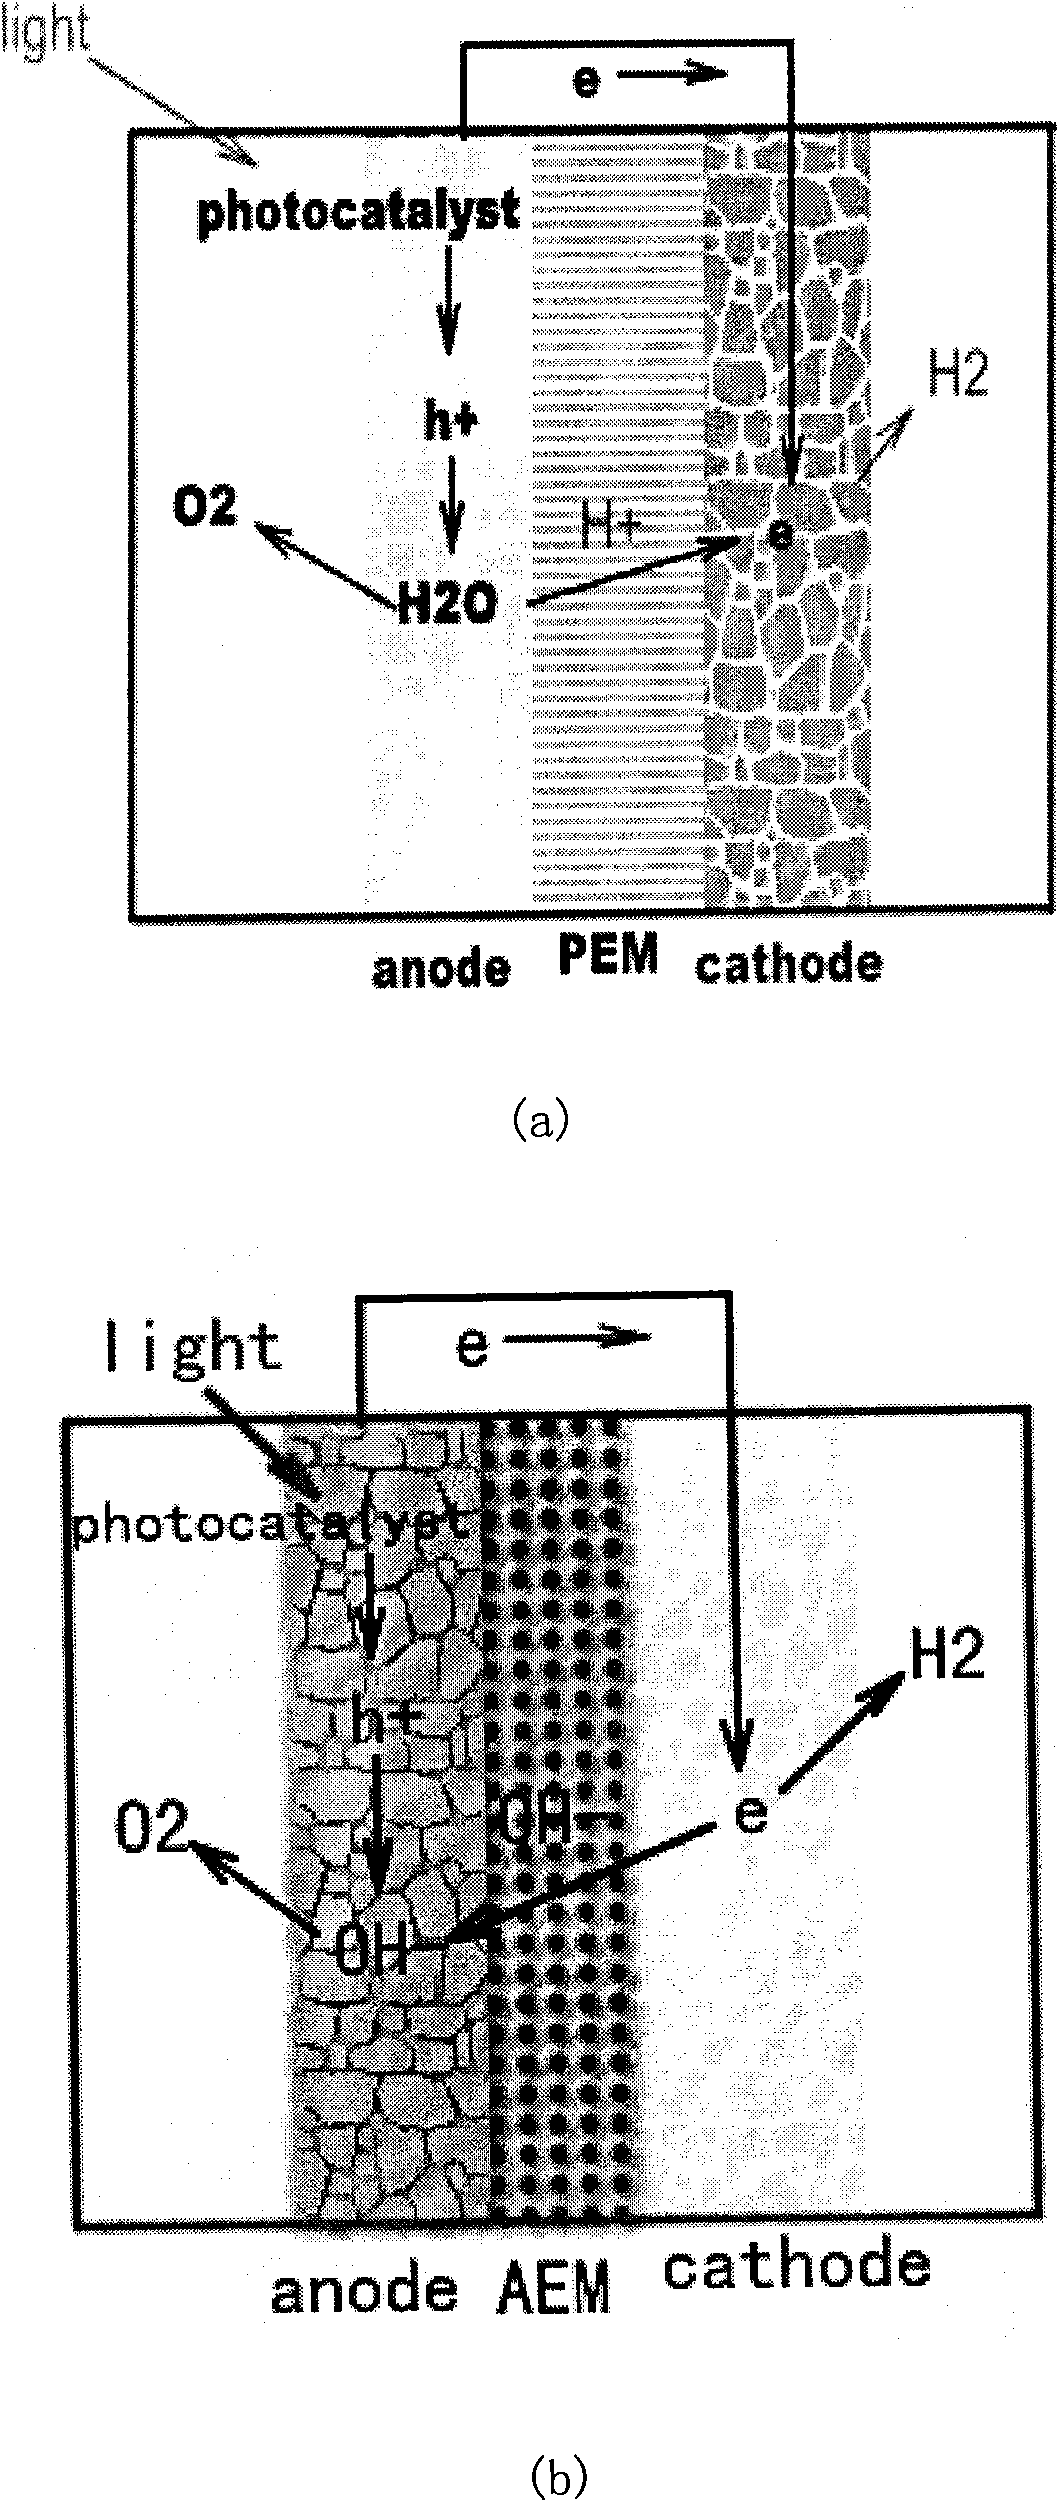 Method for separating and preparing hydrogen by decomposing water in fuel cell through photocatalysis